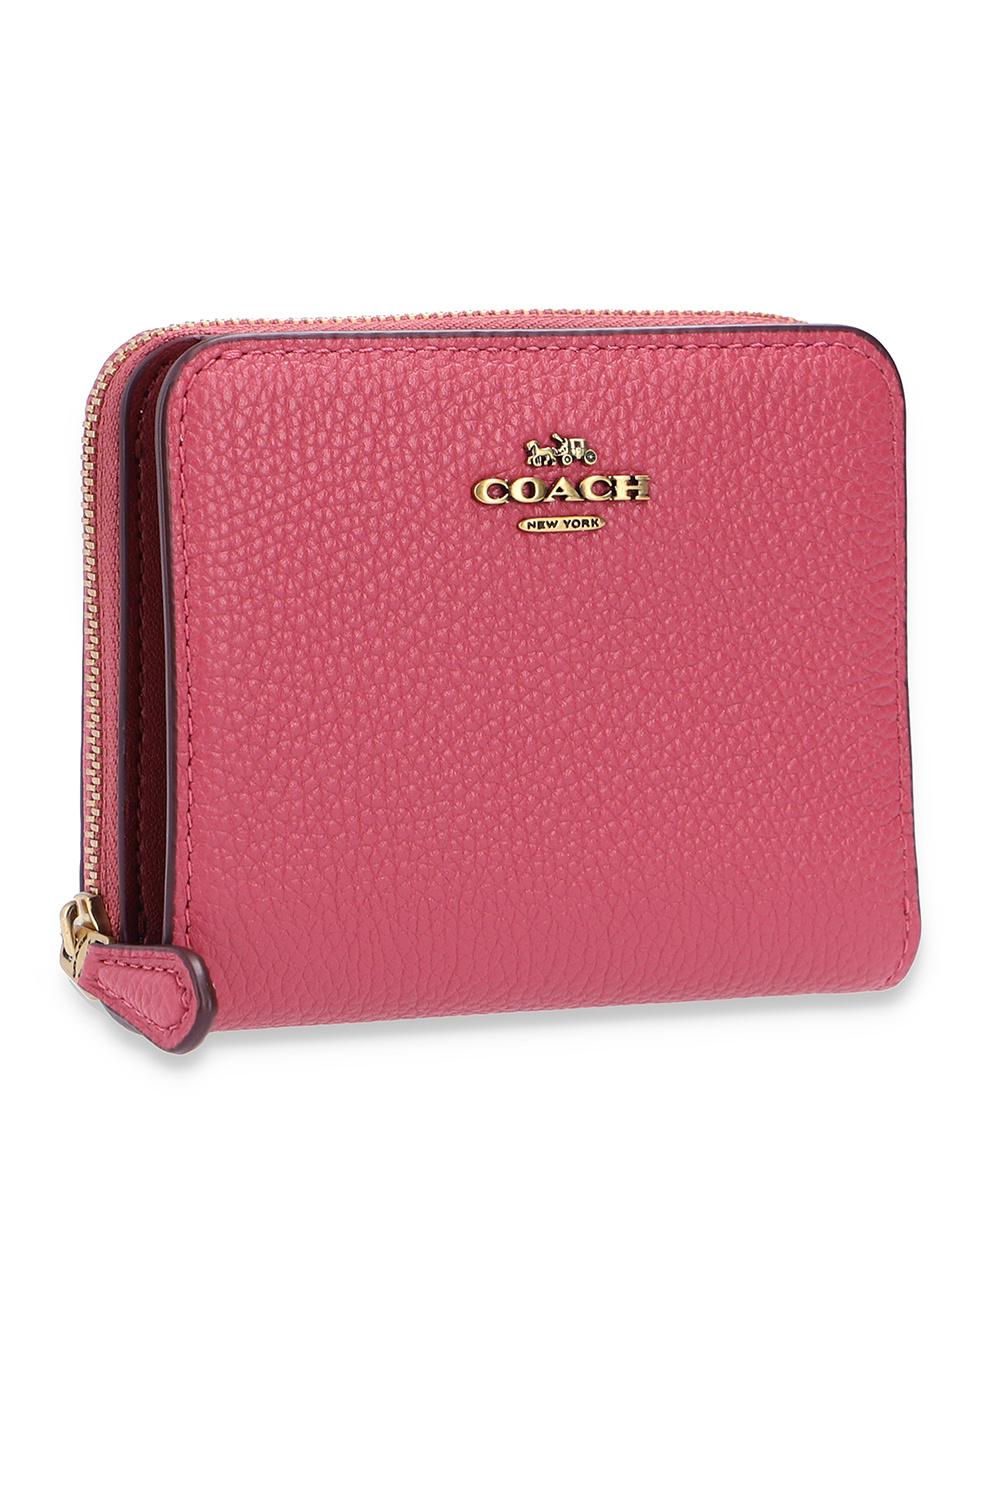 COACH Wallet With Logo Pink | Lyst